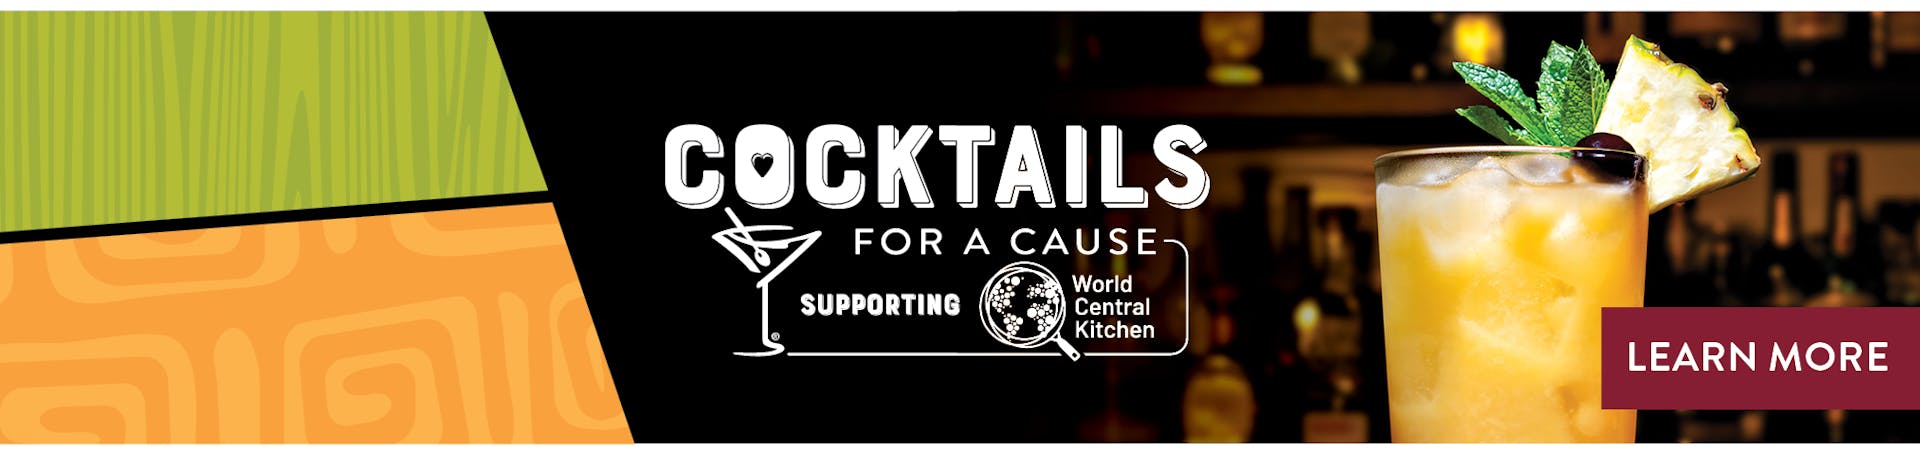 Cocktails for a cause supporting world central kitchen - learn more